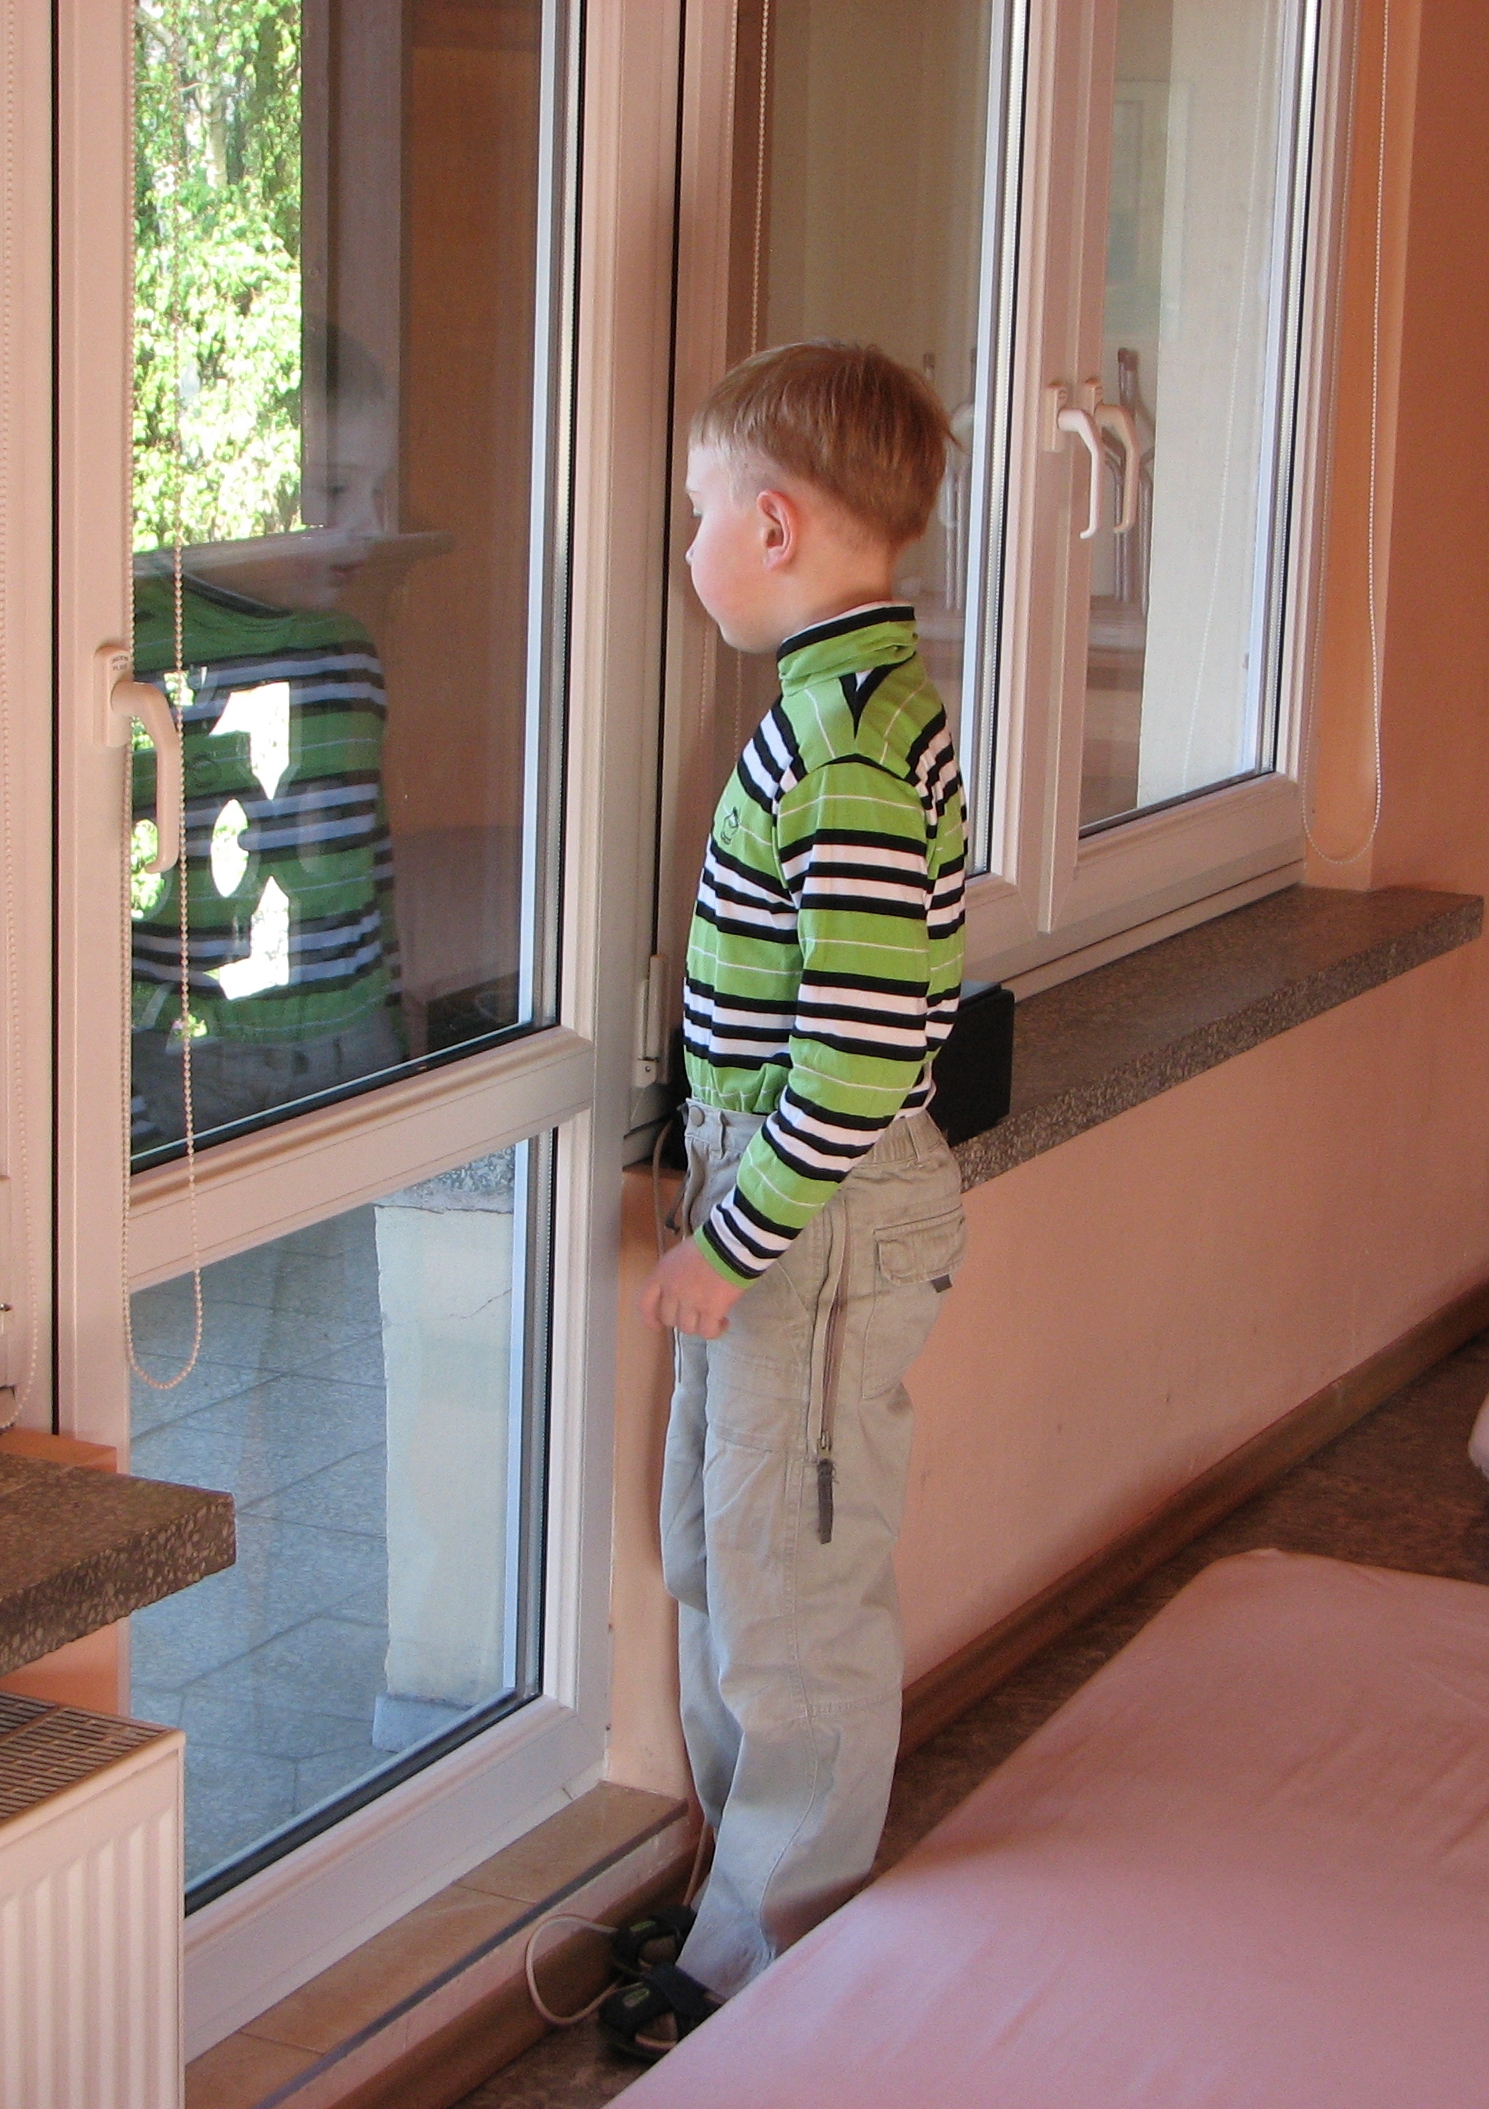 A 7-year old boy looking out the window